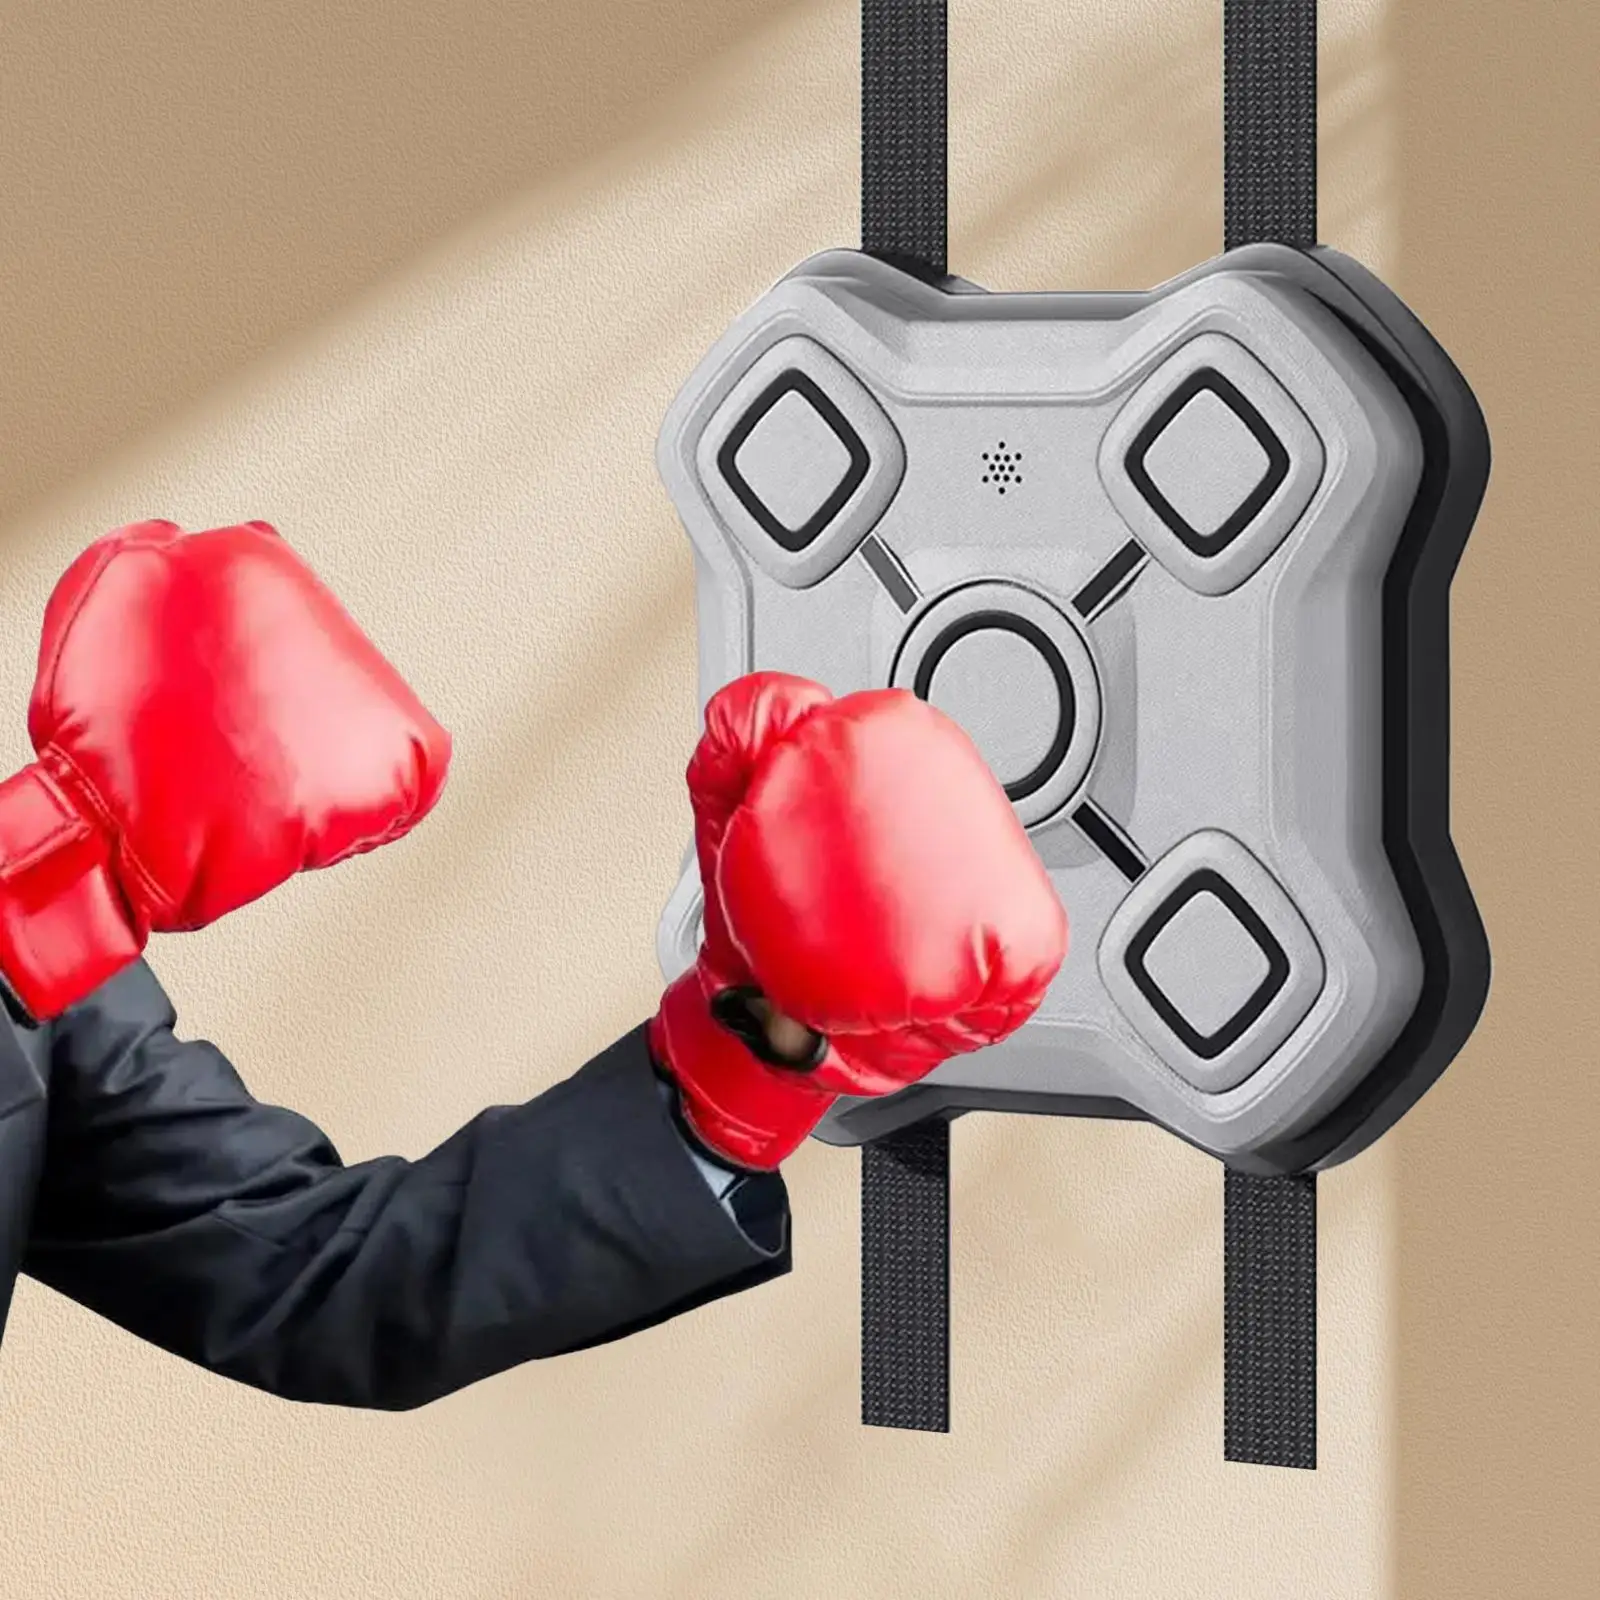 Music Boxing Machine Target Boxing Trainer USB Rechargeable Sandbag Competitions